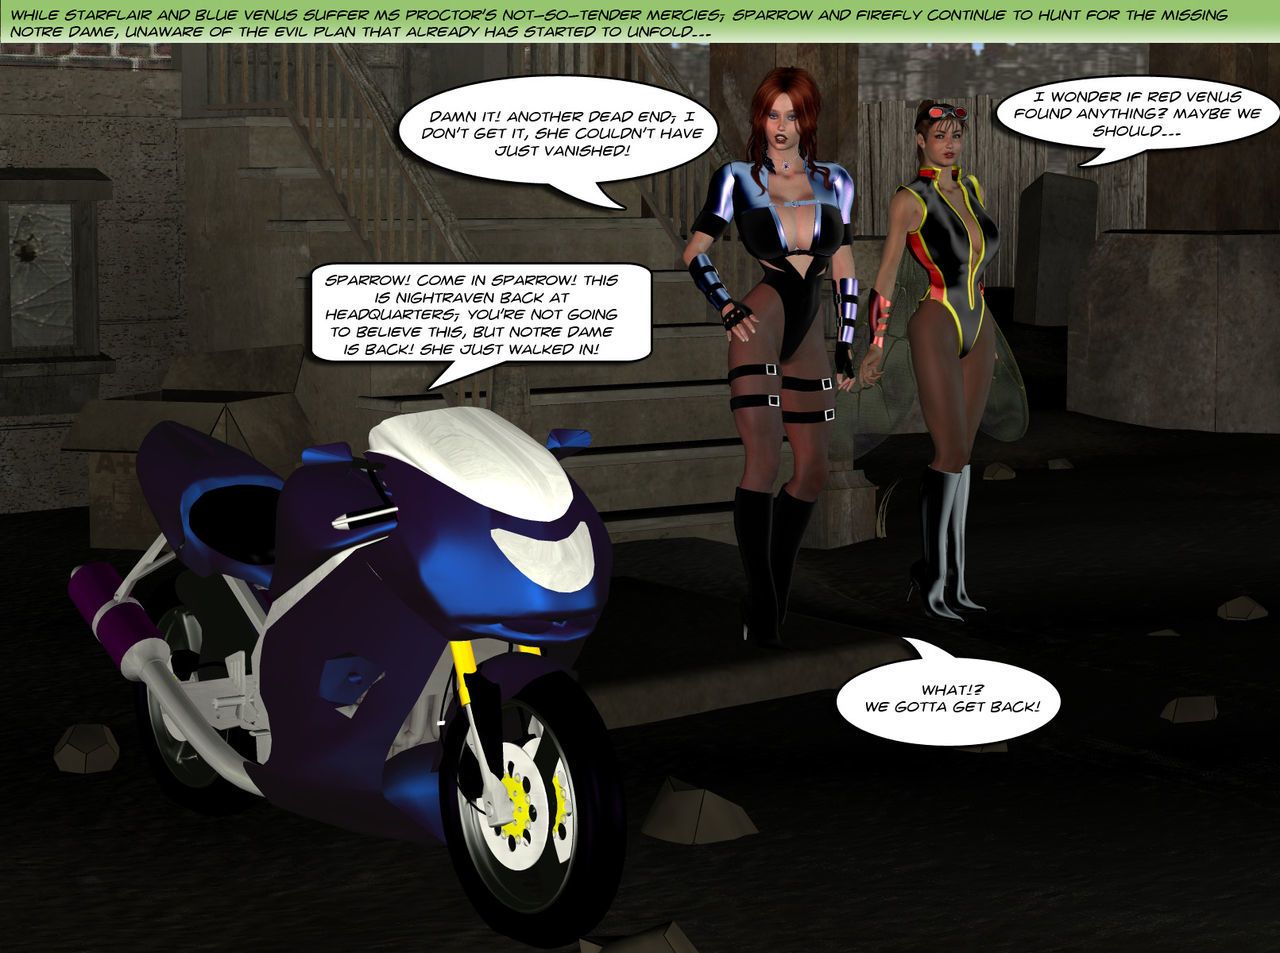 Legion of Super Heroines 05 - Way out of Bounds